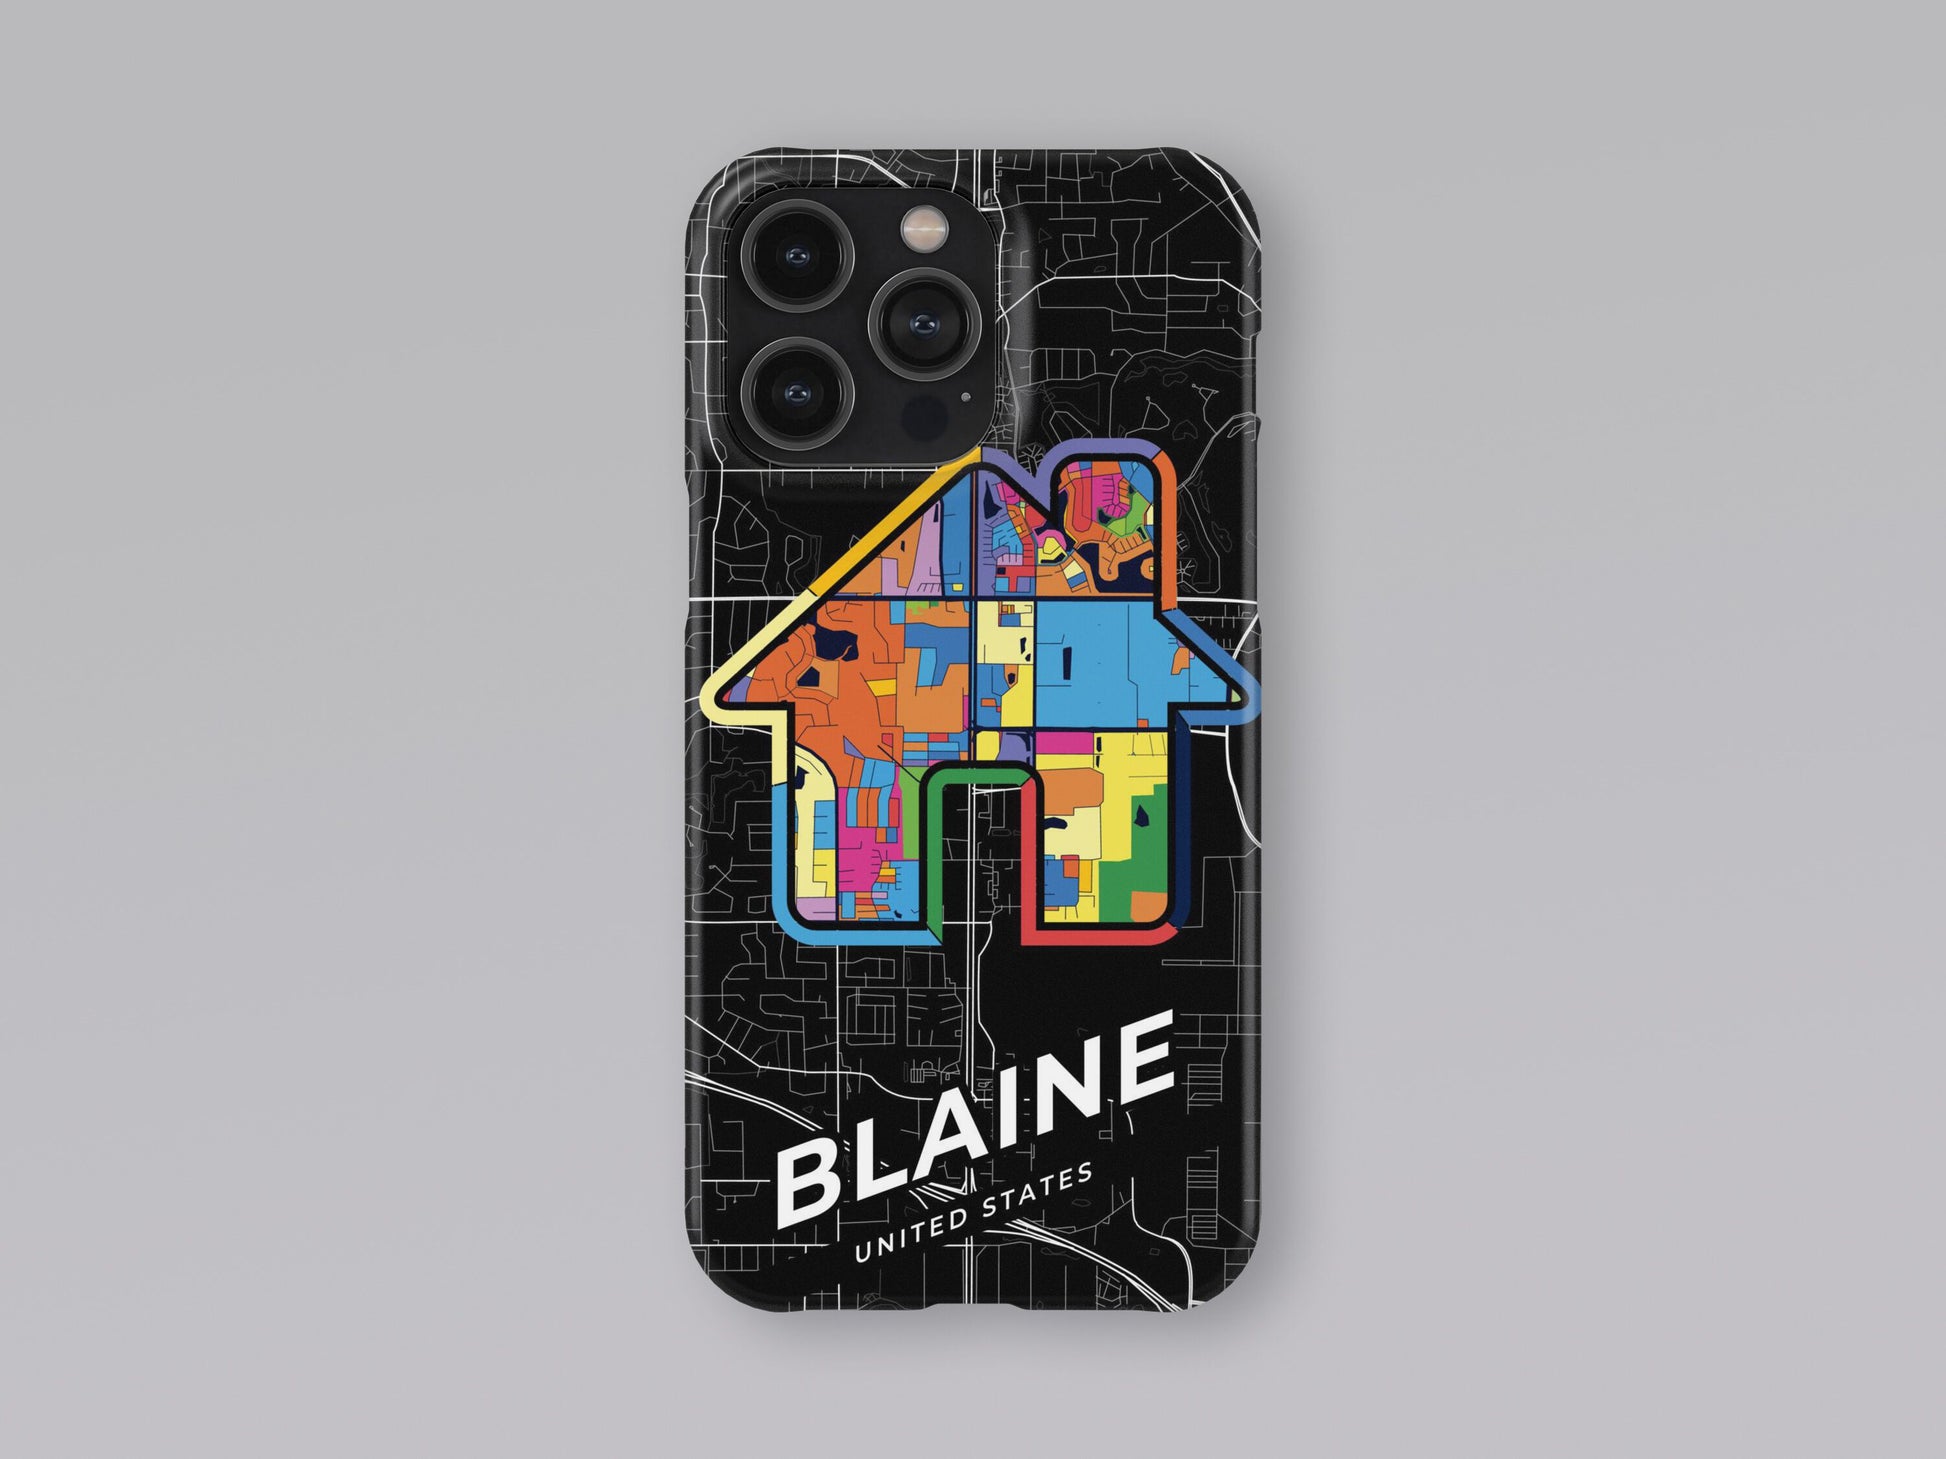 Blaine Minnesota slim phone case with colorful icon. Birthday, wedding or housewarming gift. Couple match cases. 3